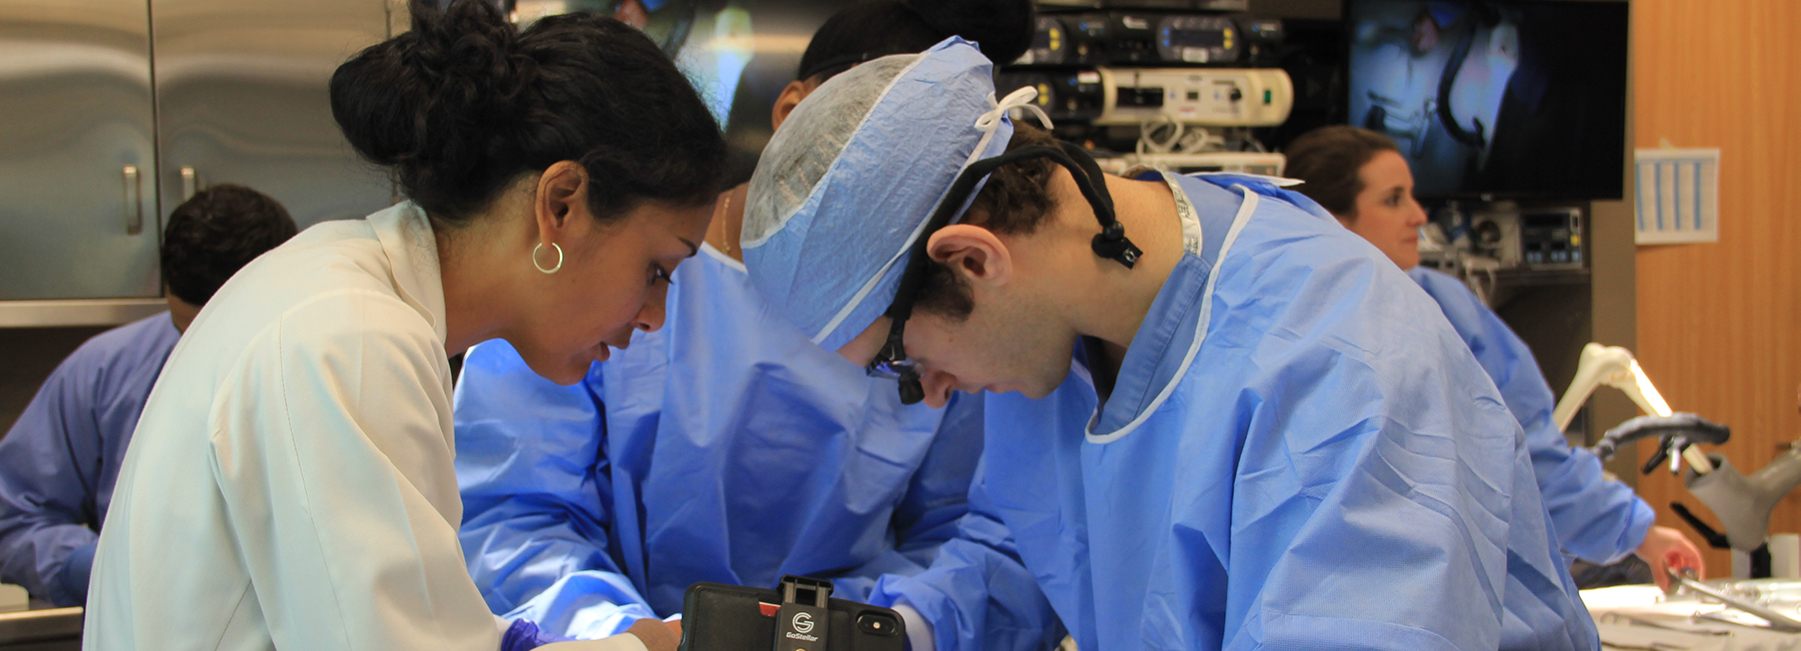 Banner image of Dr. Duretti Fufa overseeing a medical student during a procedure.